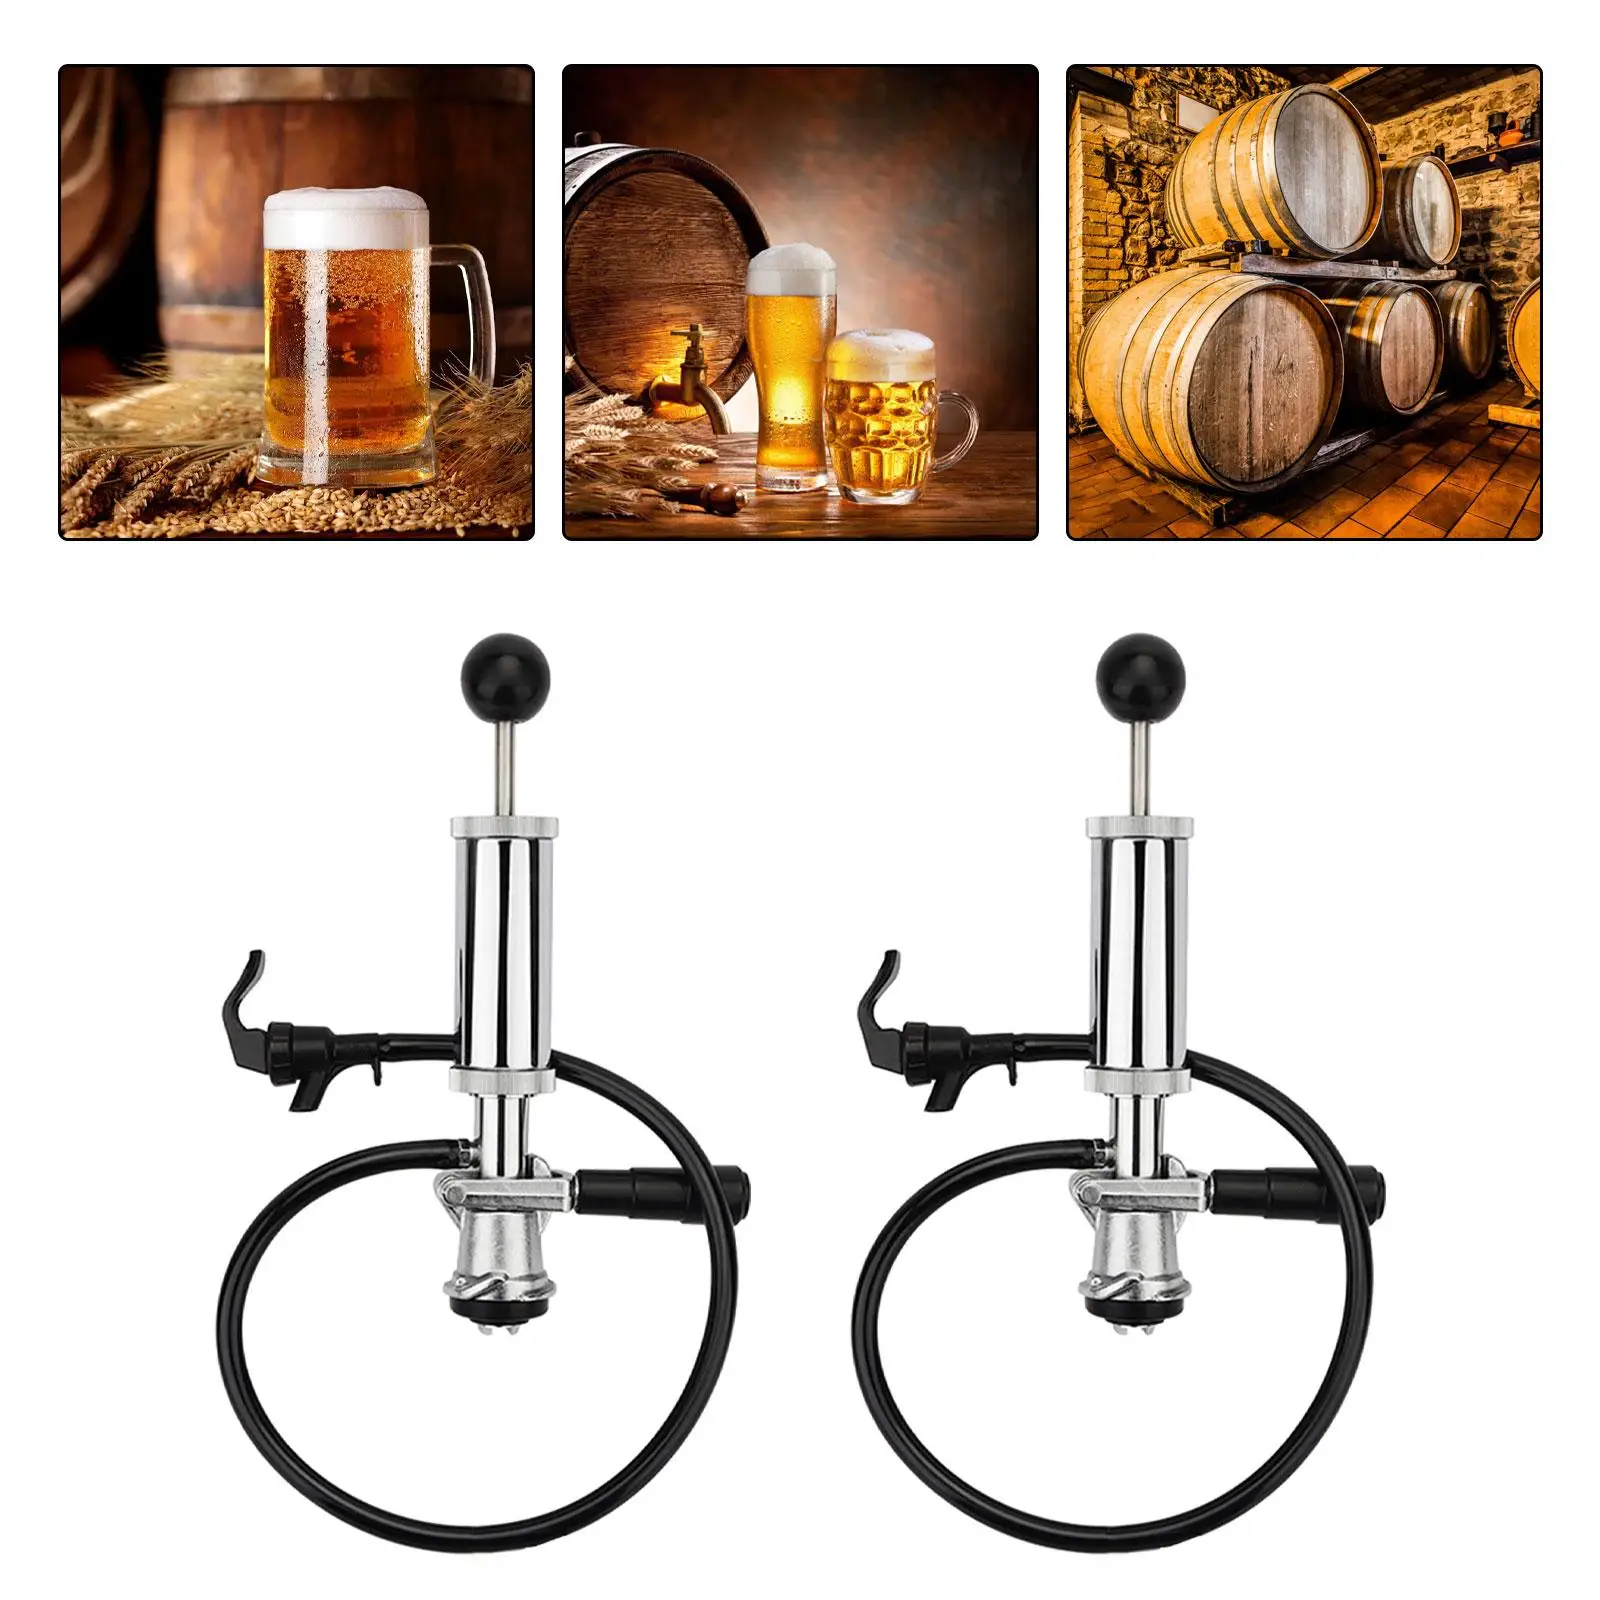 Beer Keg Taps Brewing Equipment Multipurpose S Type Pump Set Cylinder Pump Beer Dispensing for Party Tabletop Holiday Supplies